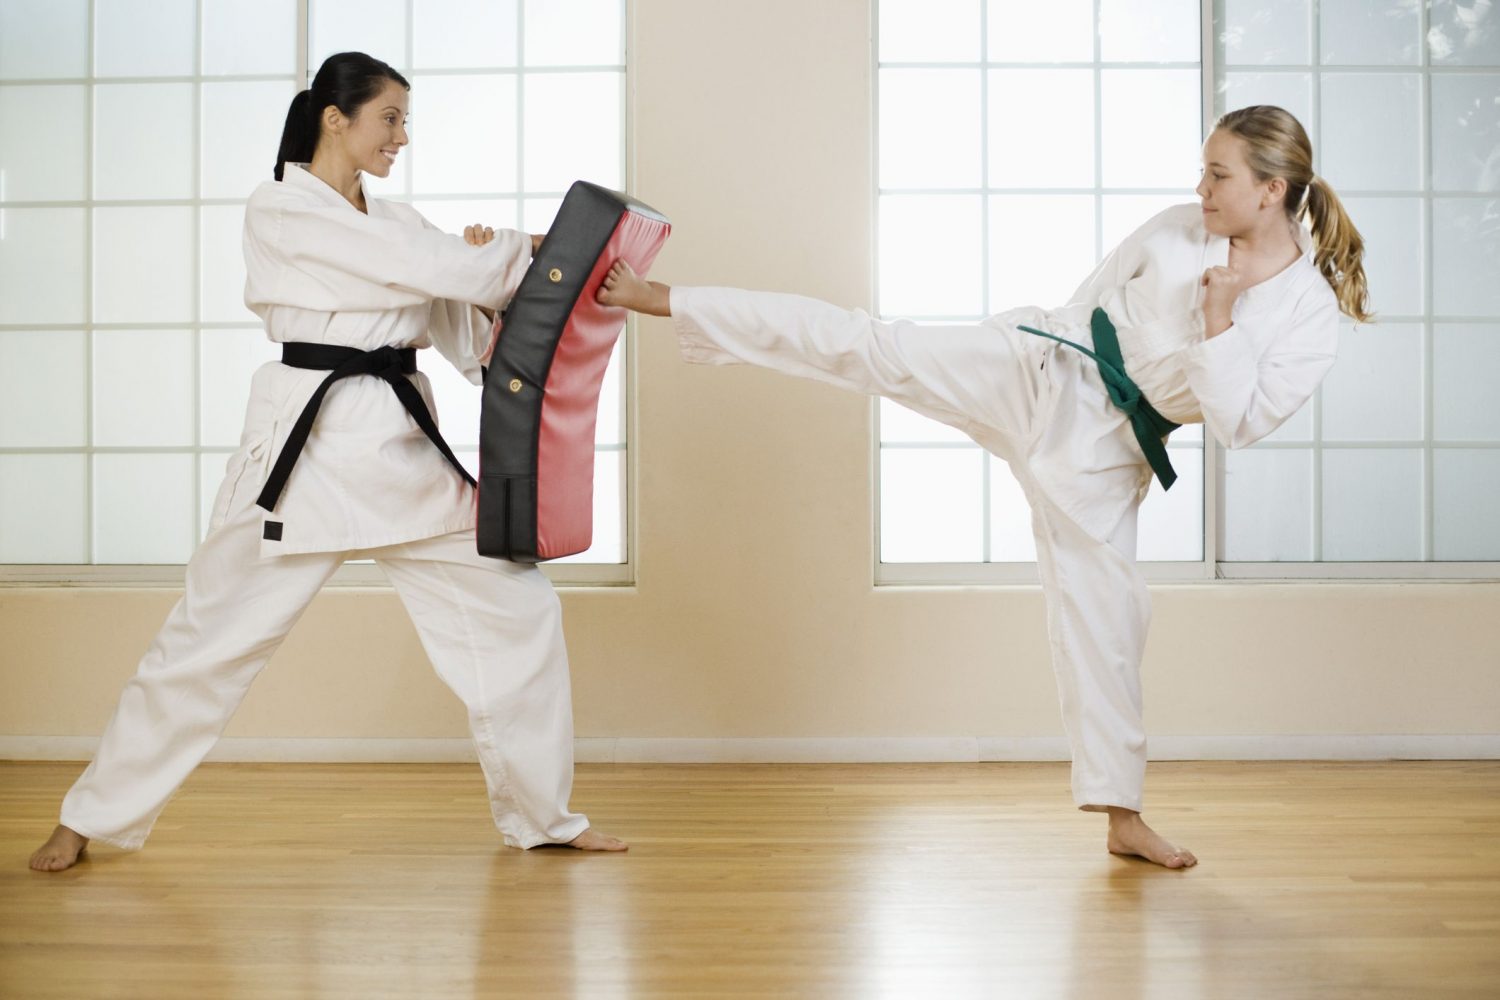 Why Should You Take up Martial Arts?